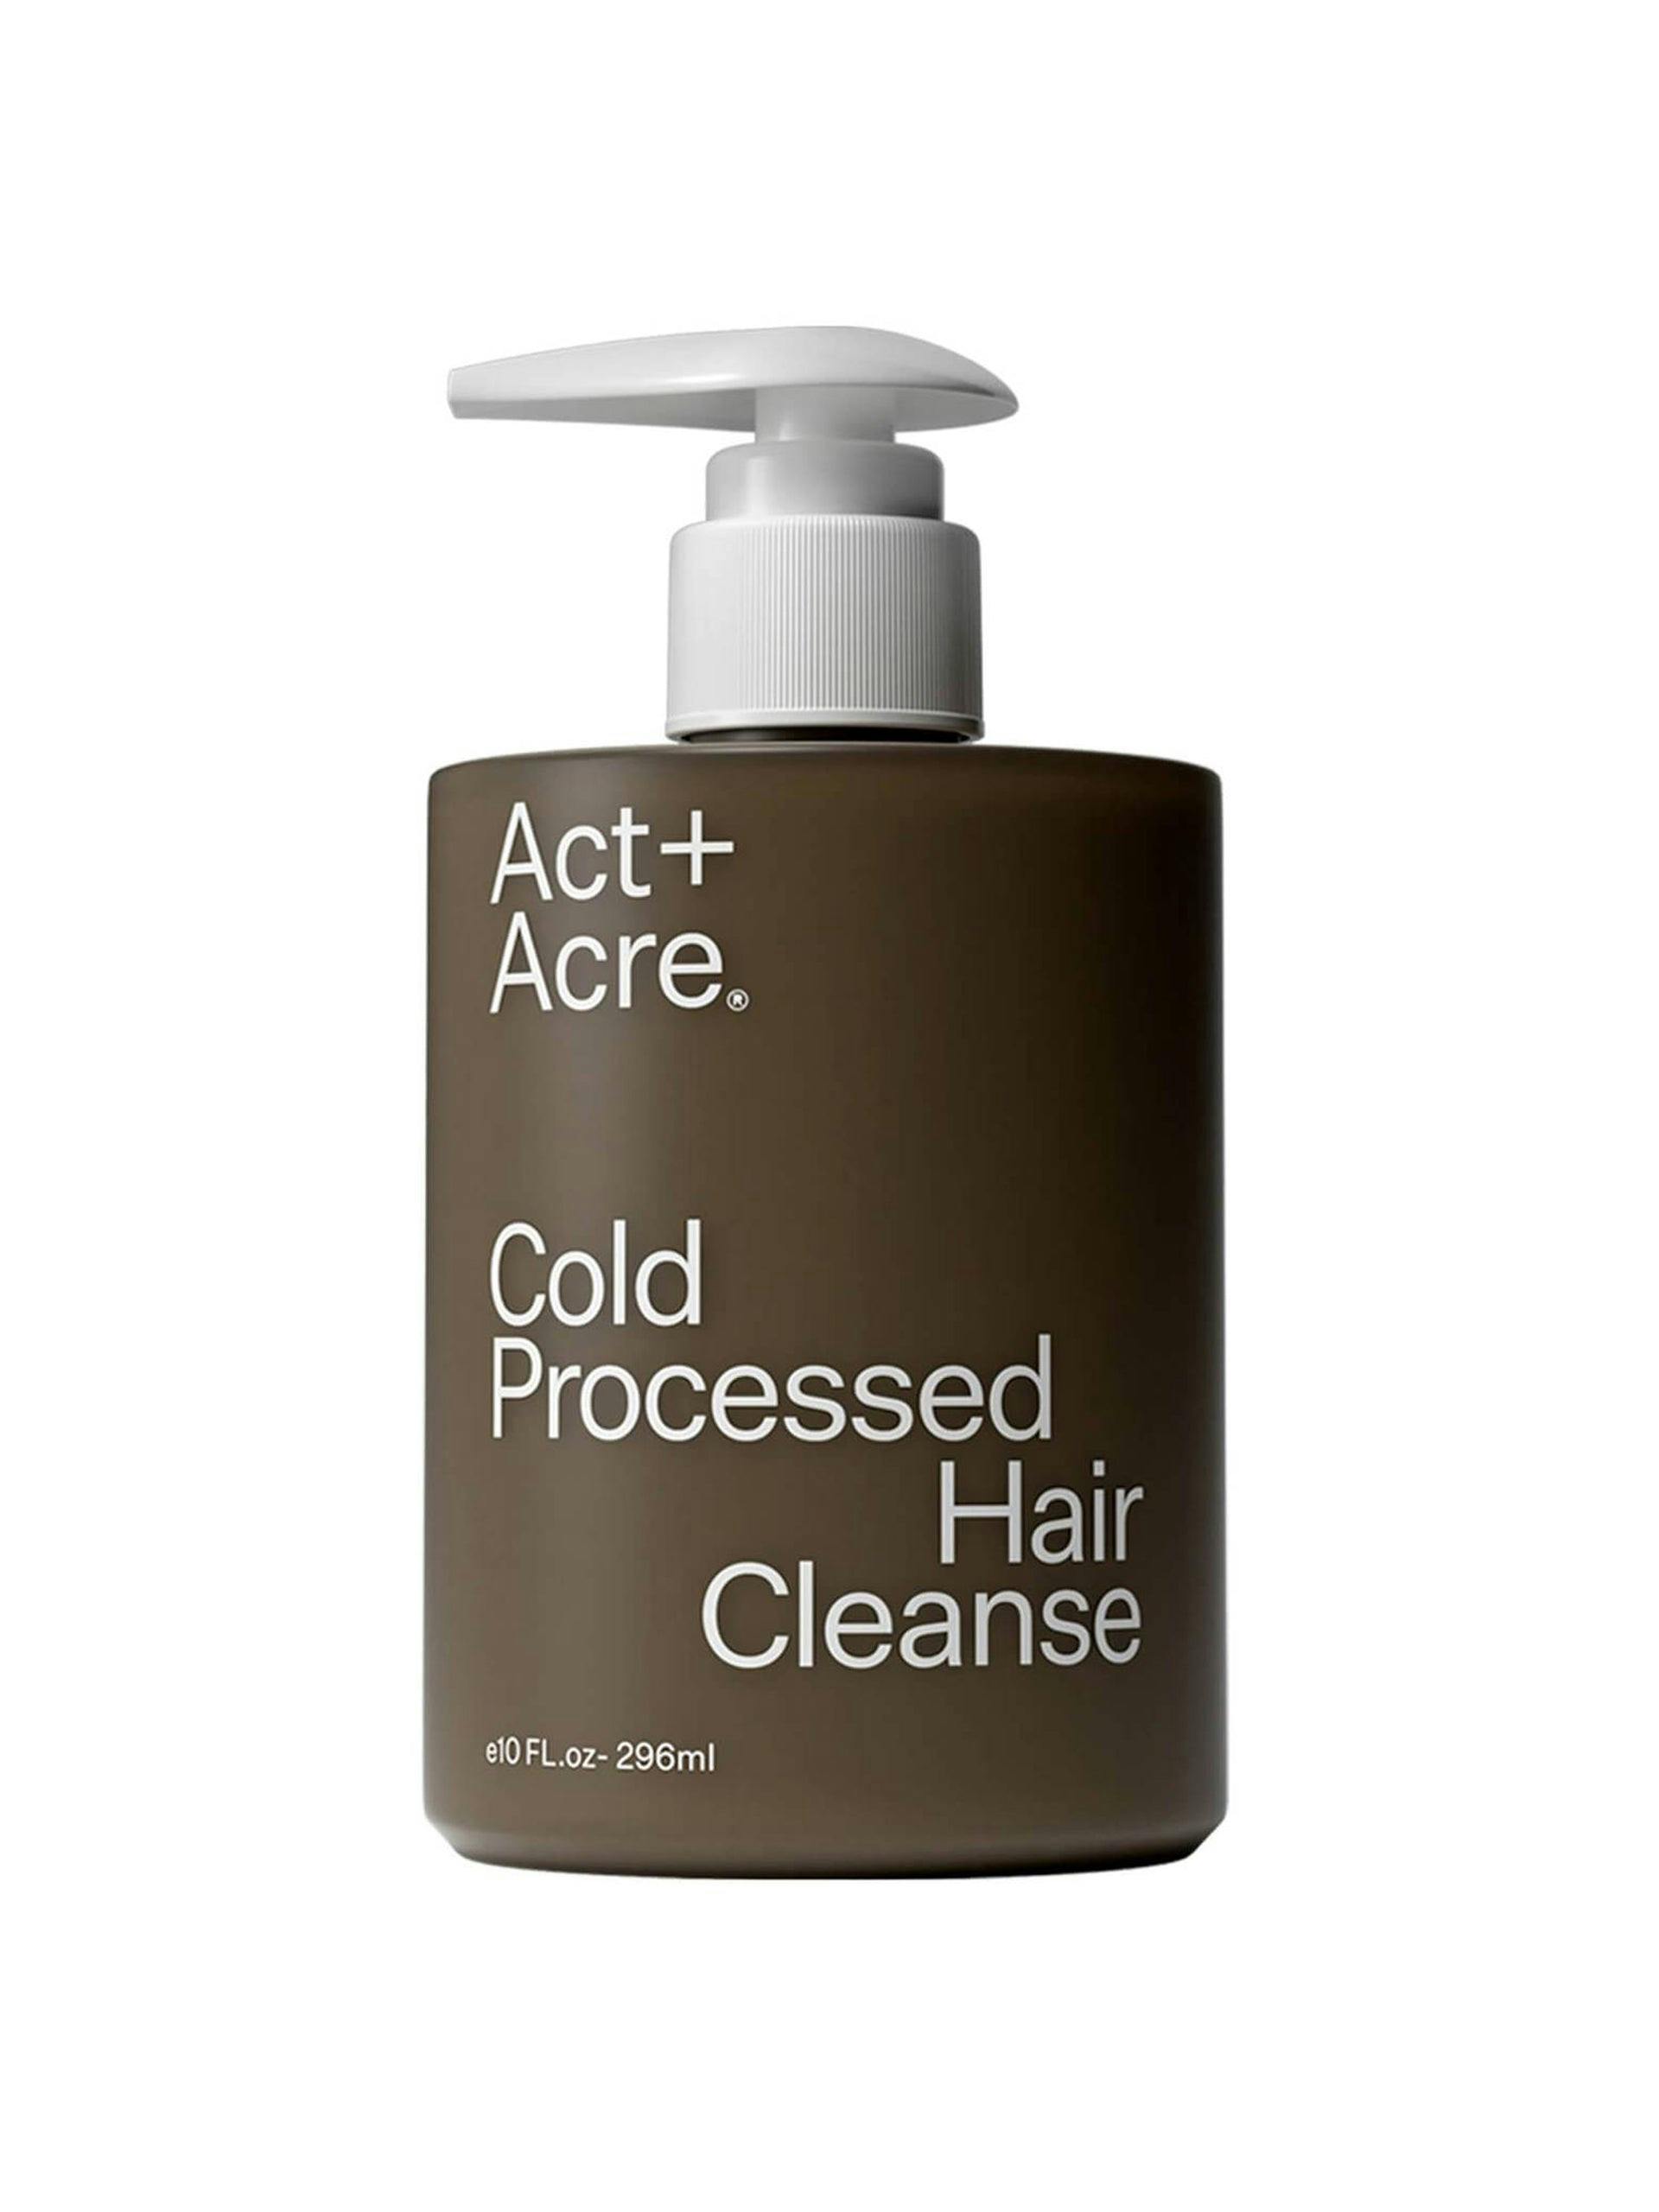 Cold processed hair shampoo